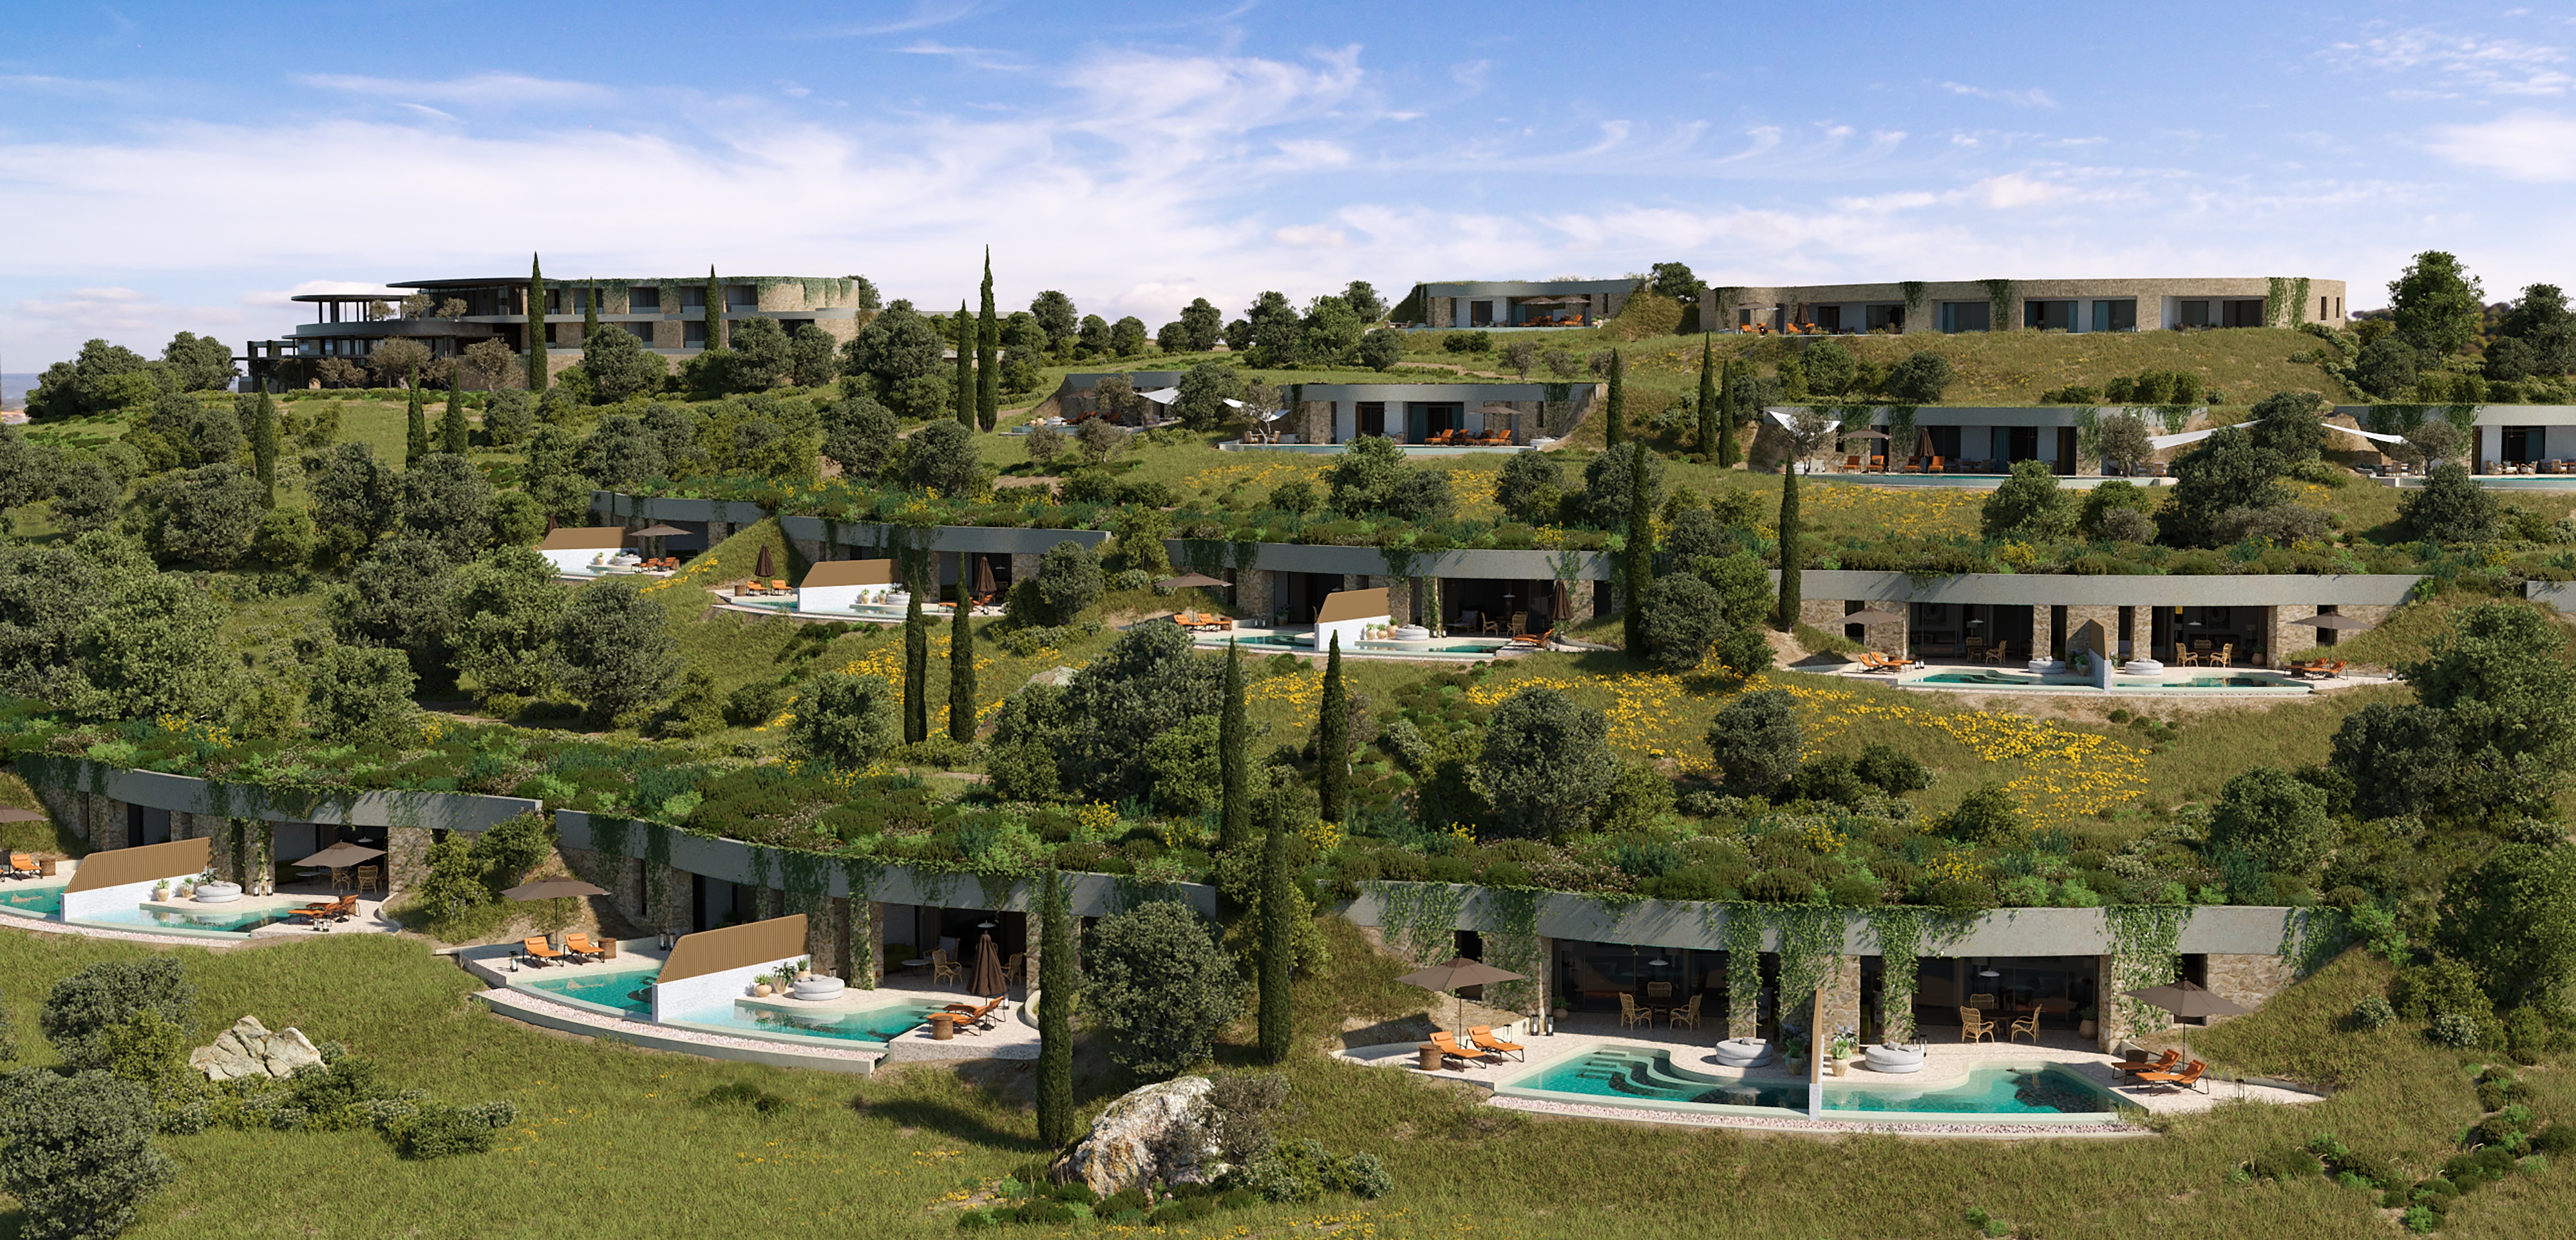 Costa Navarino receives special town planning approval for 8.500 hectares of land